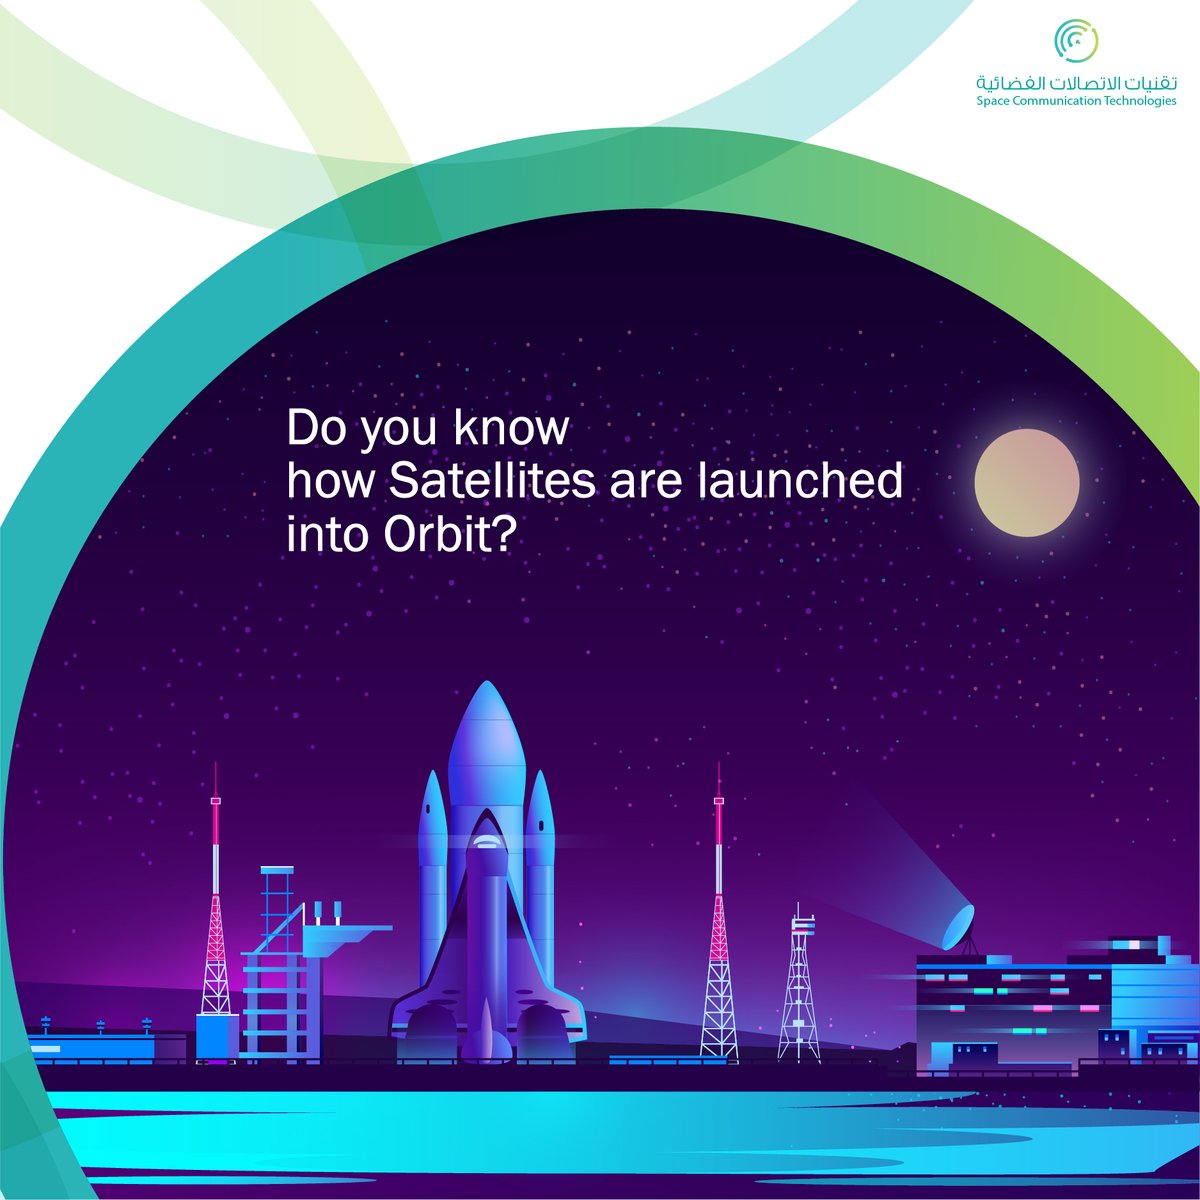 For a satellite to be launched successfully, the launch rocket must be placed in a vertical position initially, as this allows the rocket to penetrate the densest layer of the Earth’s atmosphere quickly.
Details: bit.ly/2OQ6Kk4
#SCT #didyouknow #orbit #satellitelaunch